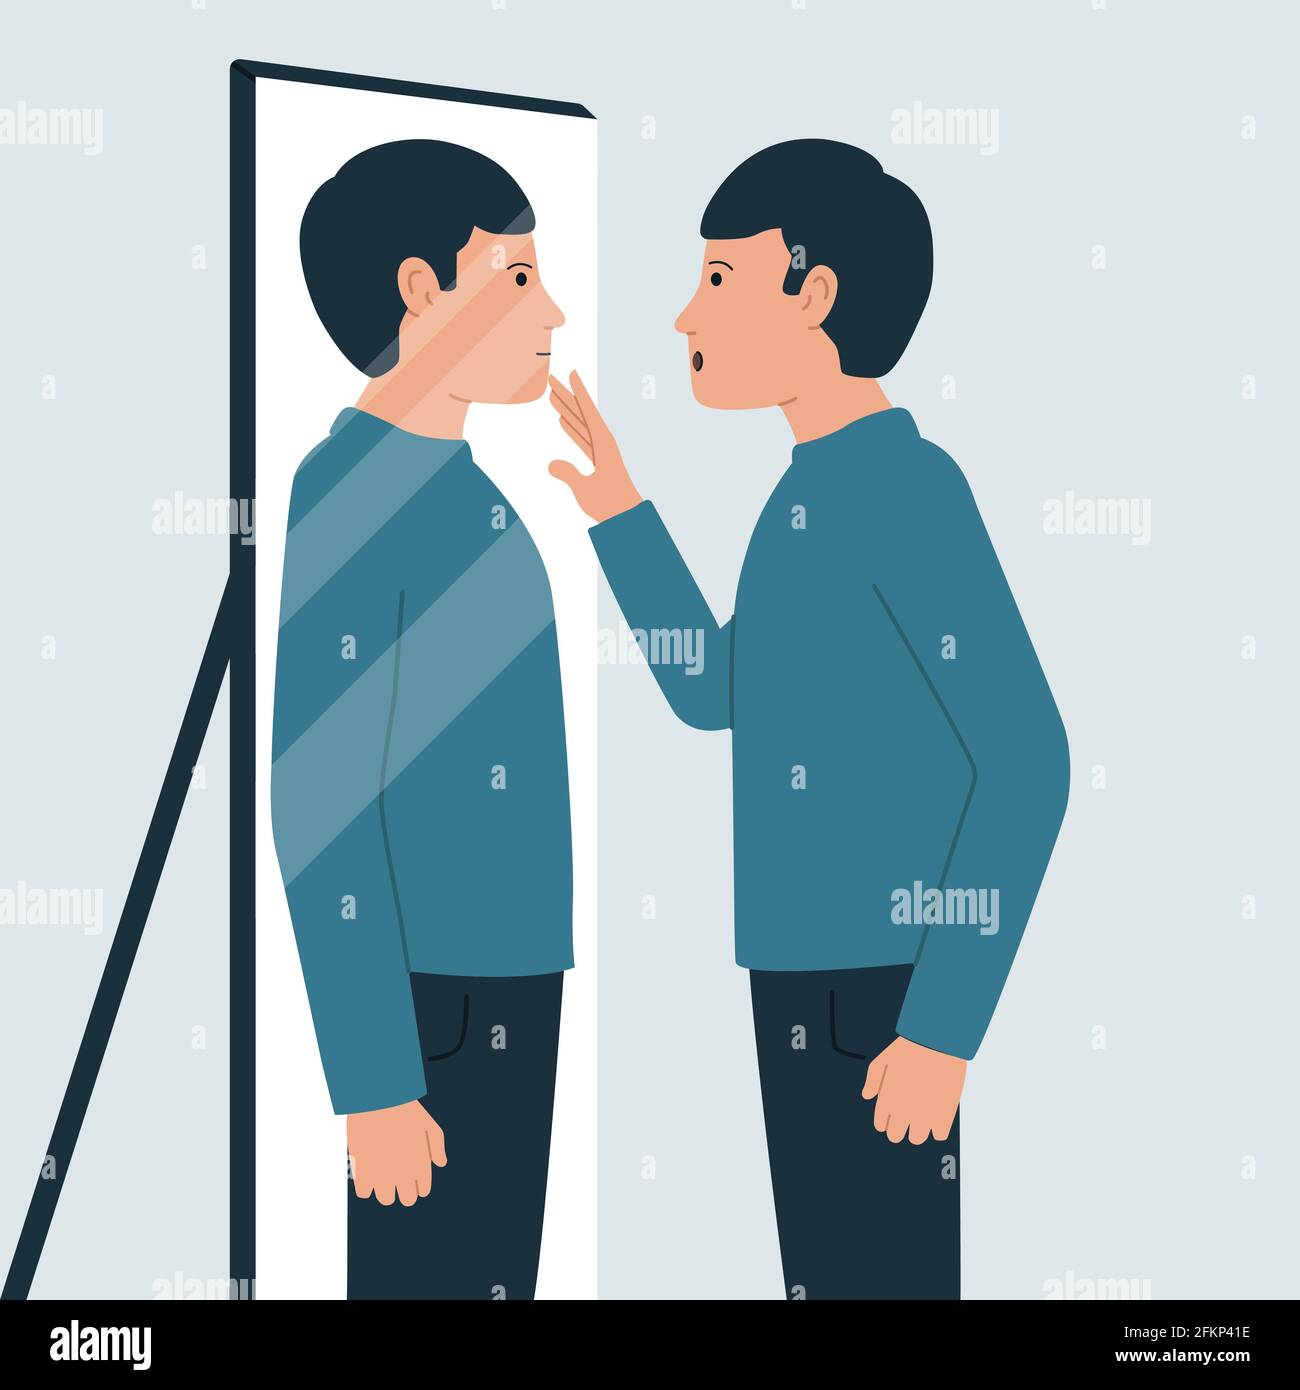 Vector illustration of a guy feeling like a different person. Stock Vector